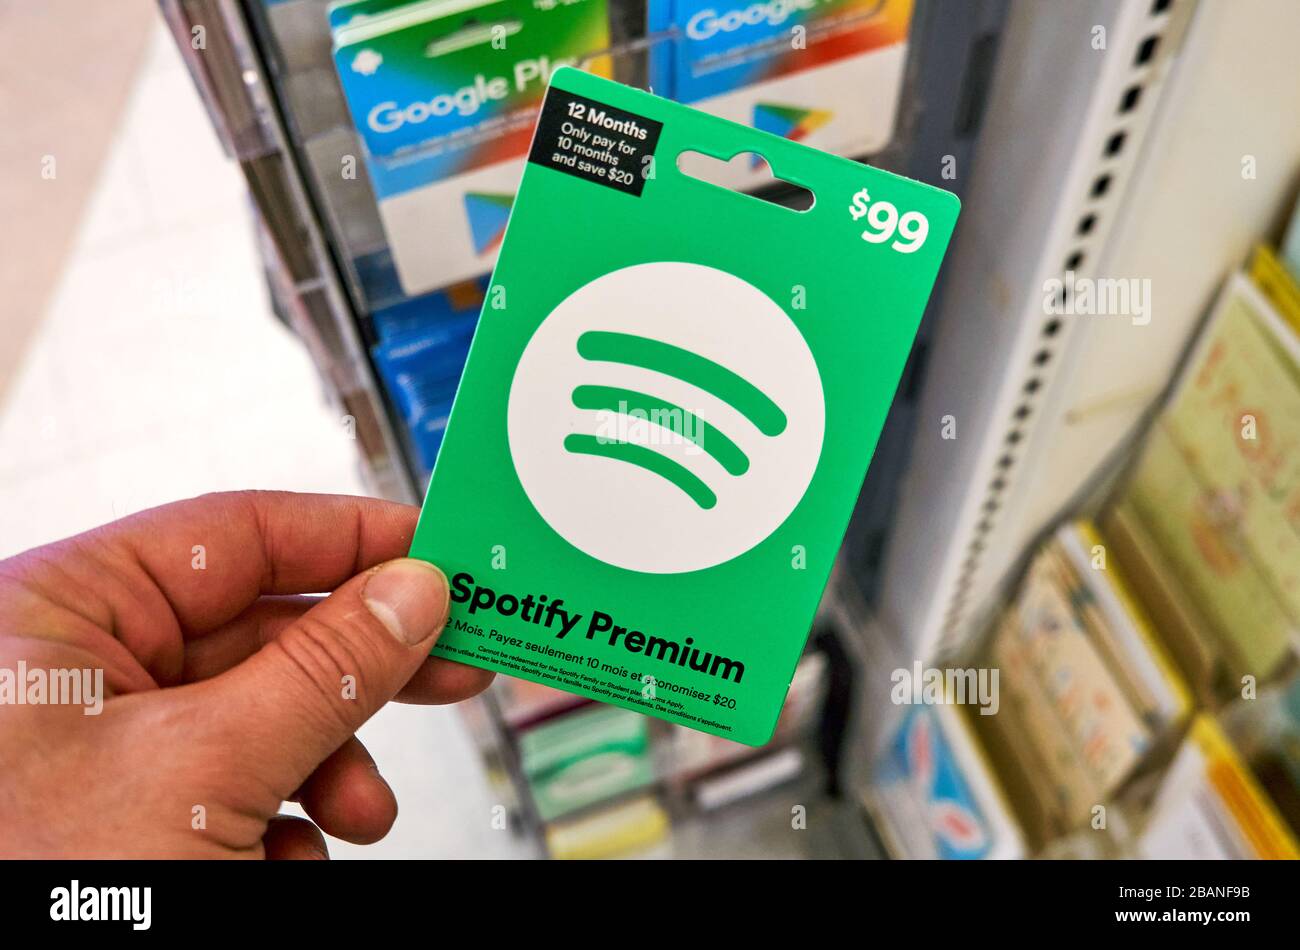 Montreal, Canada - March 24, 2020: Spotify green gift card in a